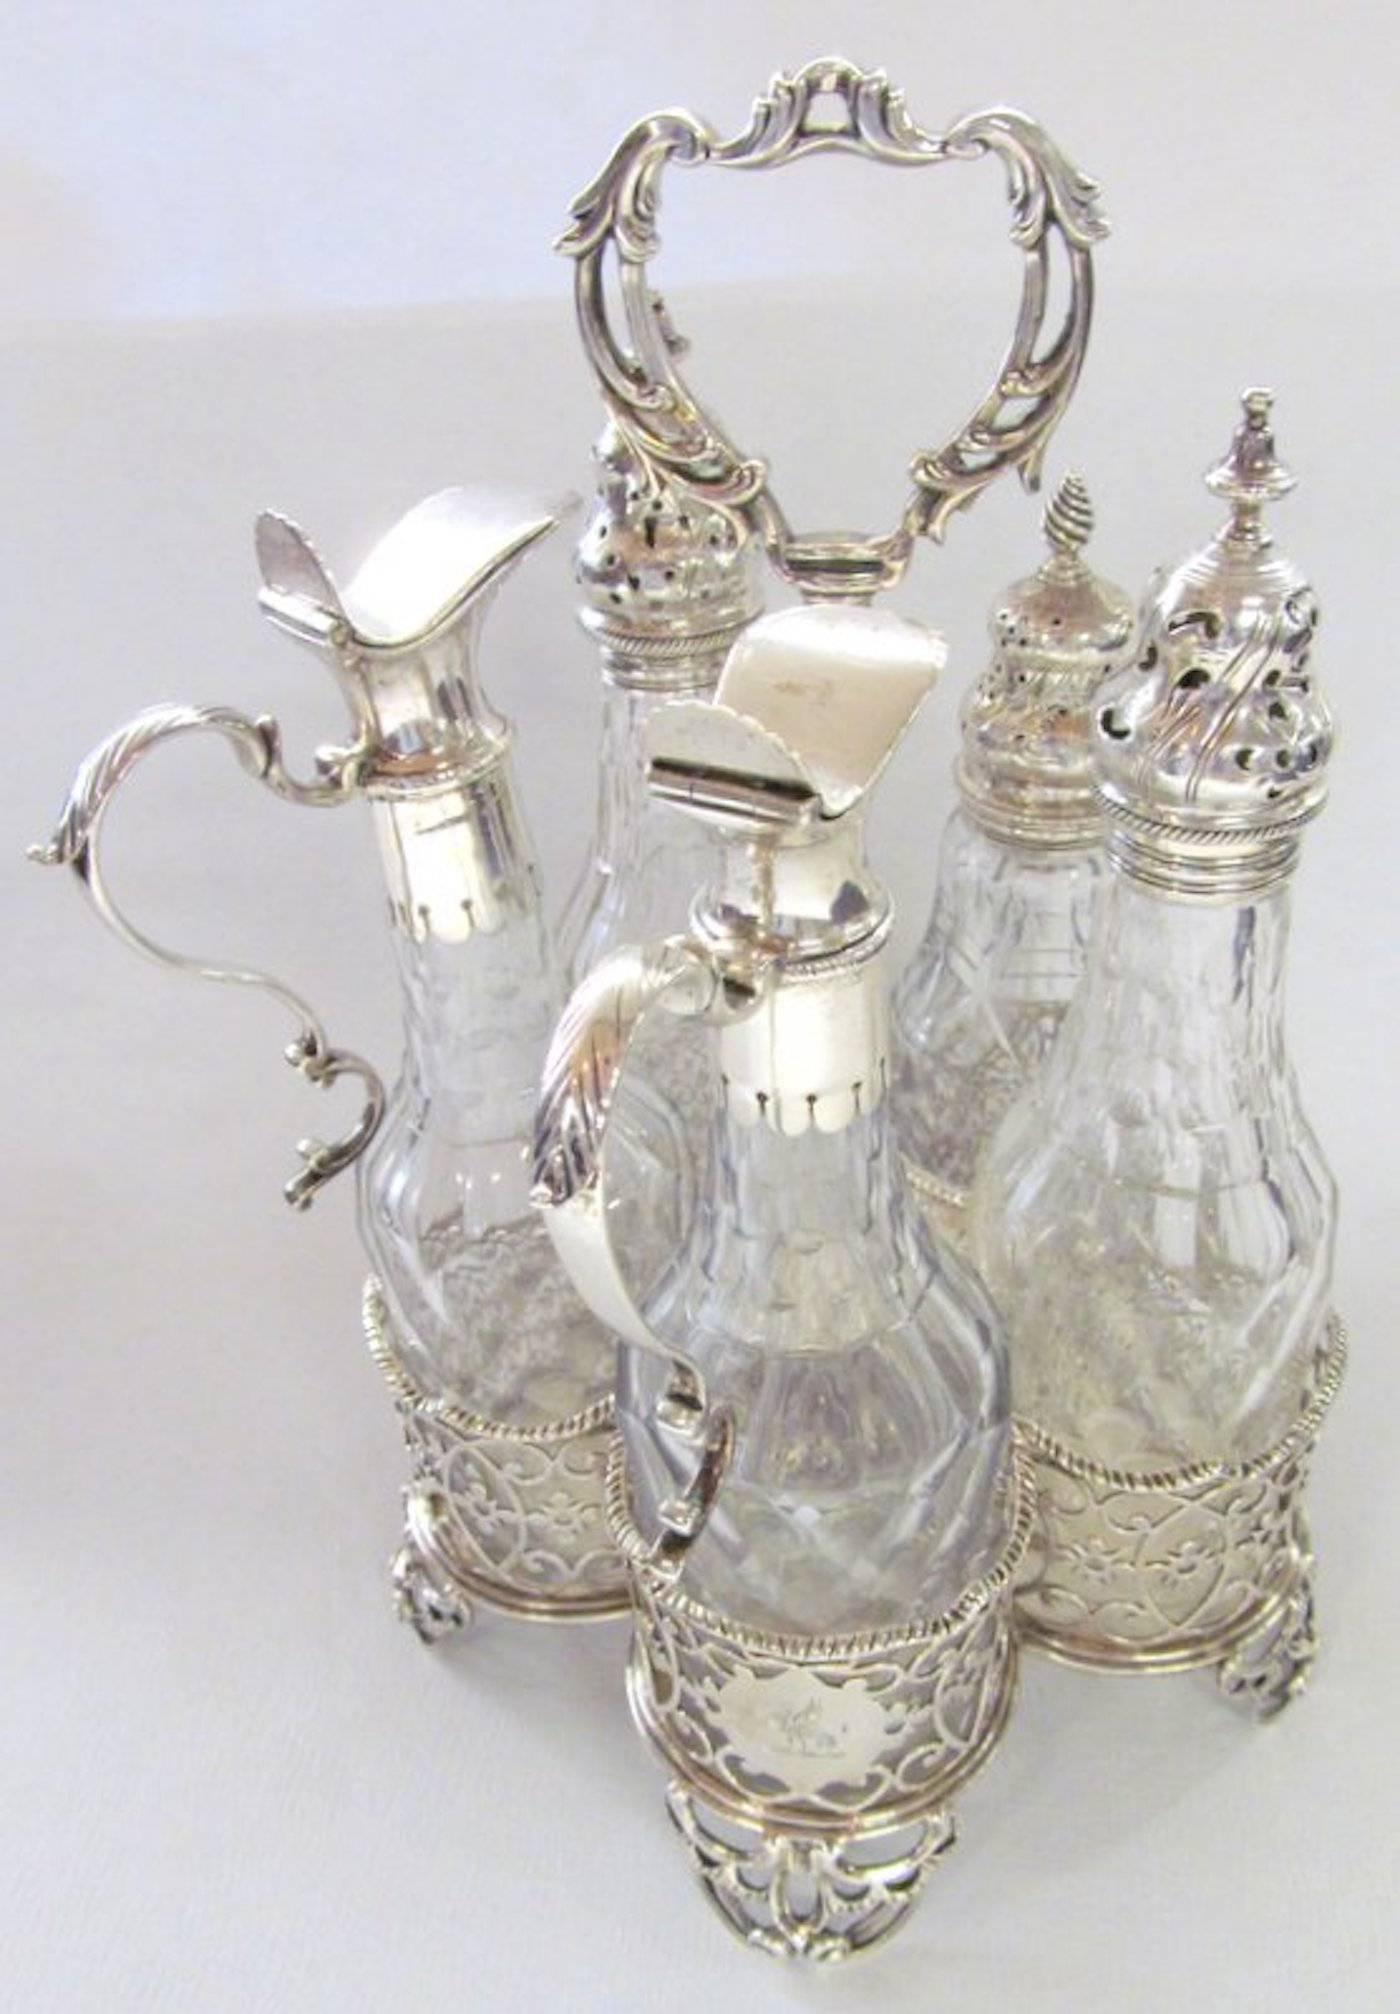 Fabulous and rare George III period five-bottle Warwick cruet set with makers marks and hallmarks for Charles Aldridge and Henry Green, London, 1771-1772.

One of the bottles is not original but is of the period. (Set has been priced accordingly